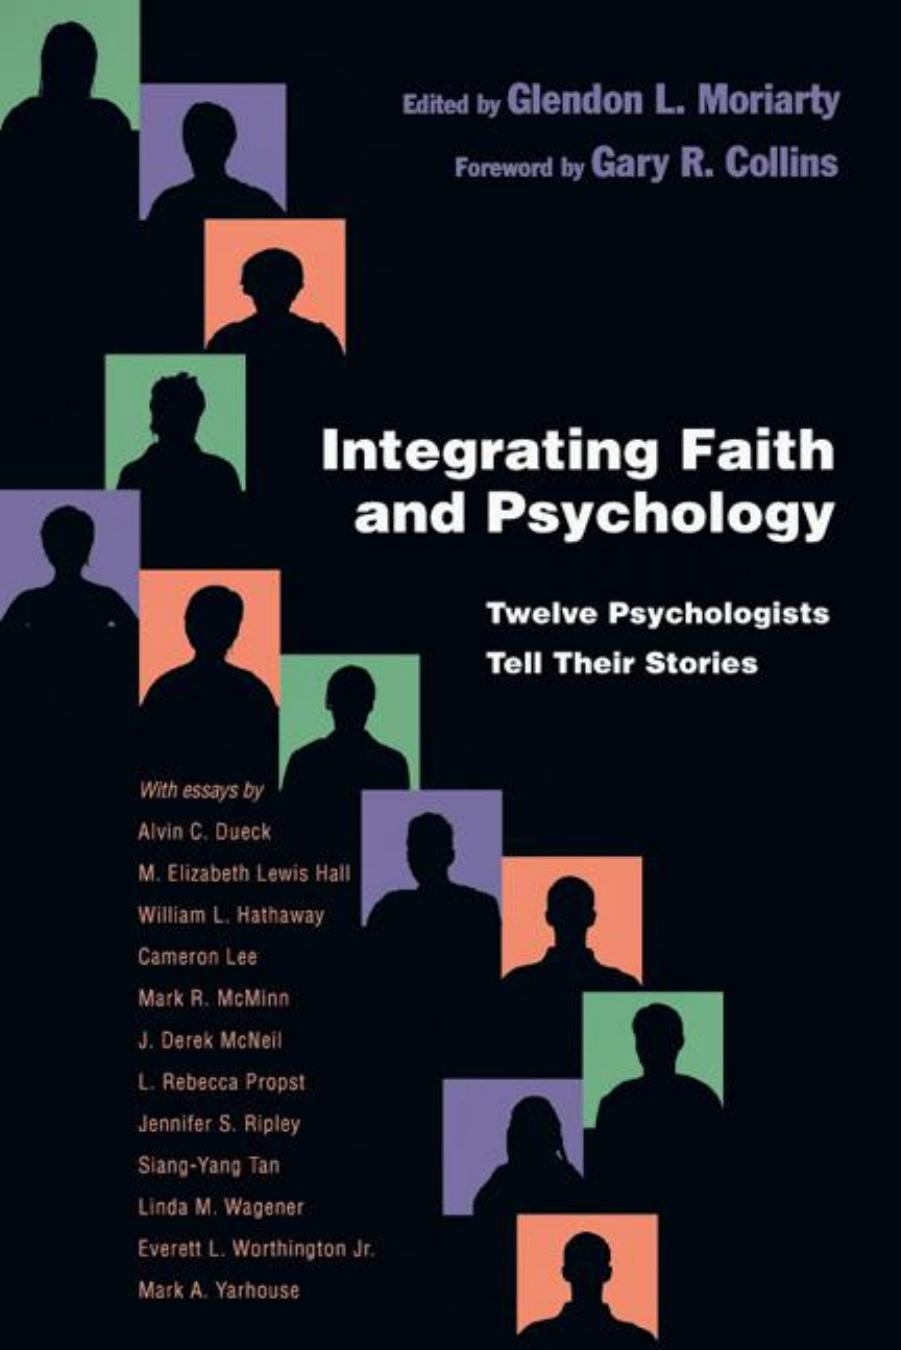 Integrating Faith and Psychology : Twelve Psychologists Tell Their Stories by Glendon L. Moriarty; Gary R. Collins